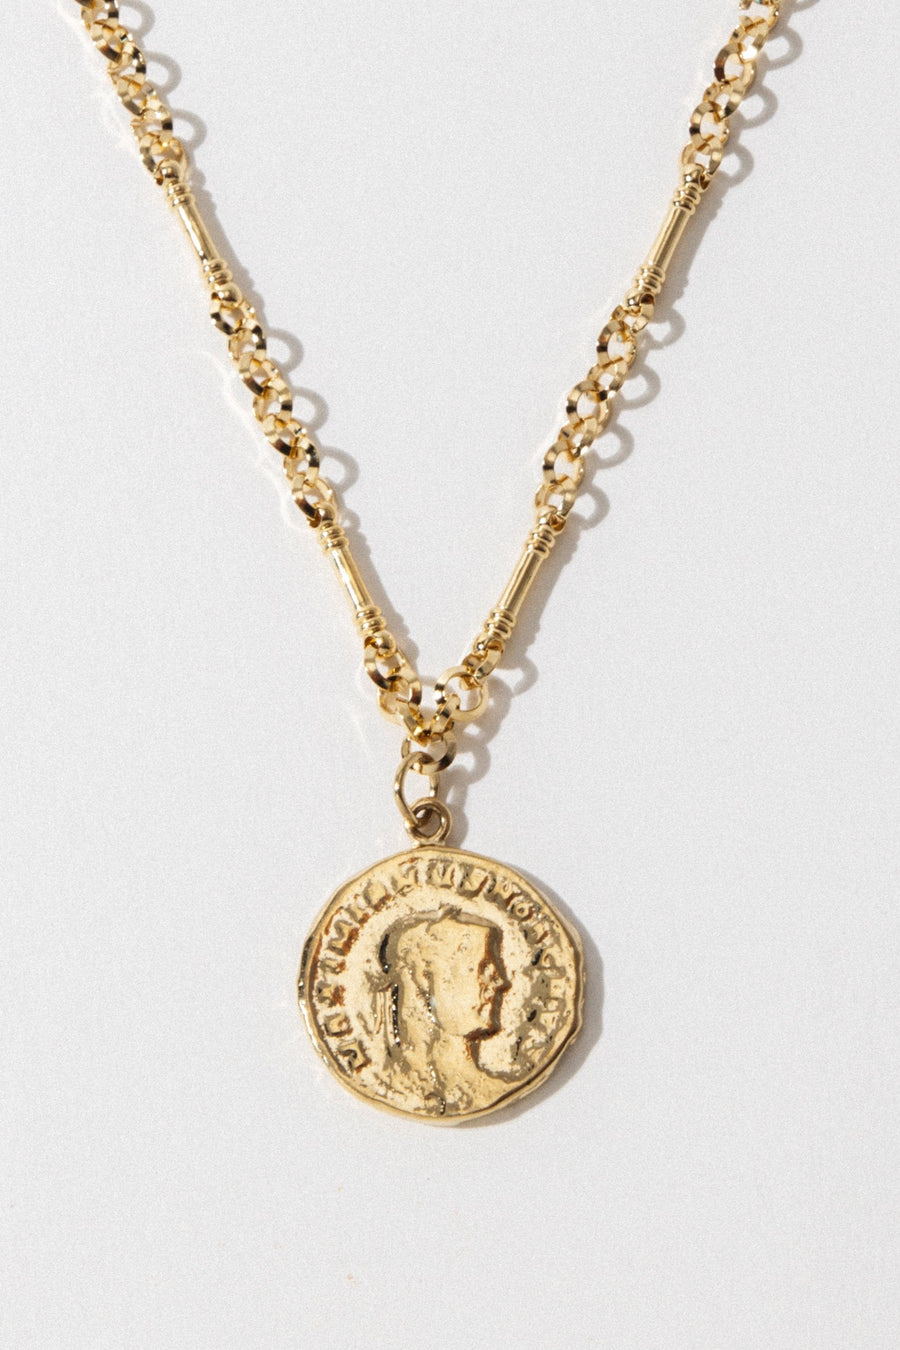 Goddess Jewelry Gold / 20 Inches Roma Coin Necklace